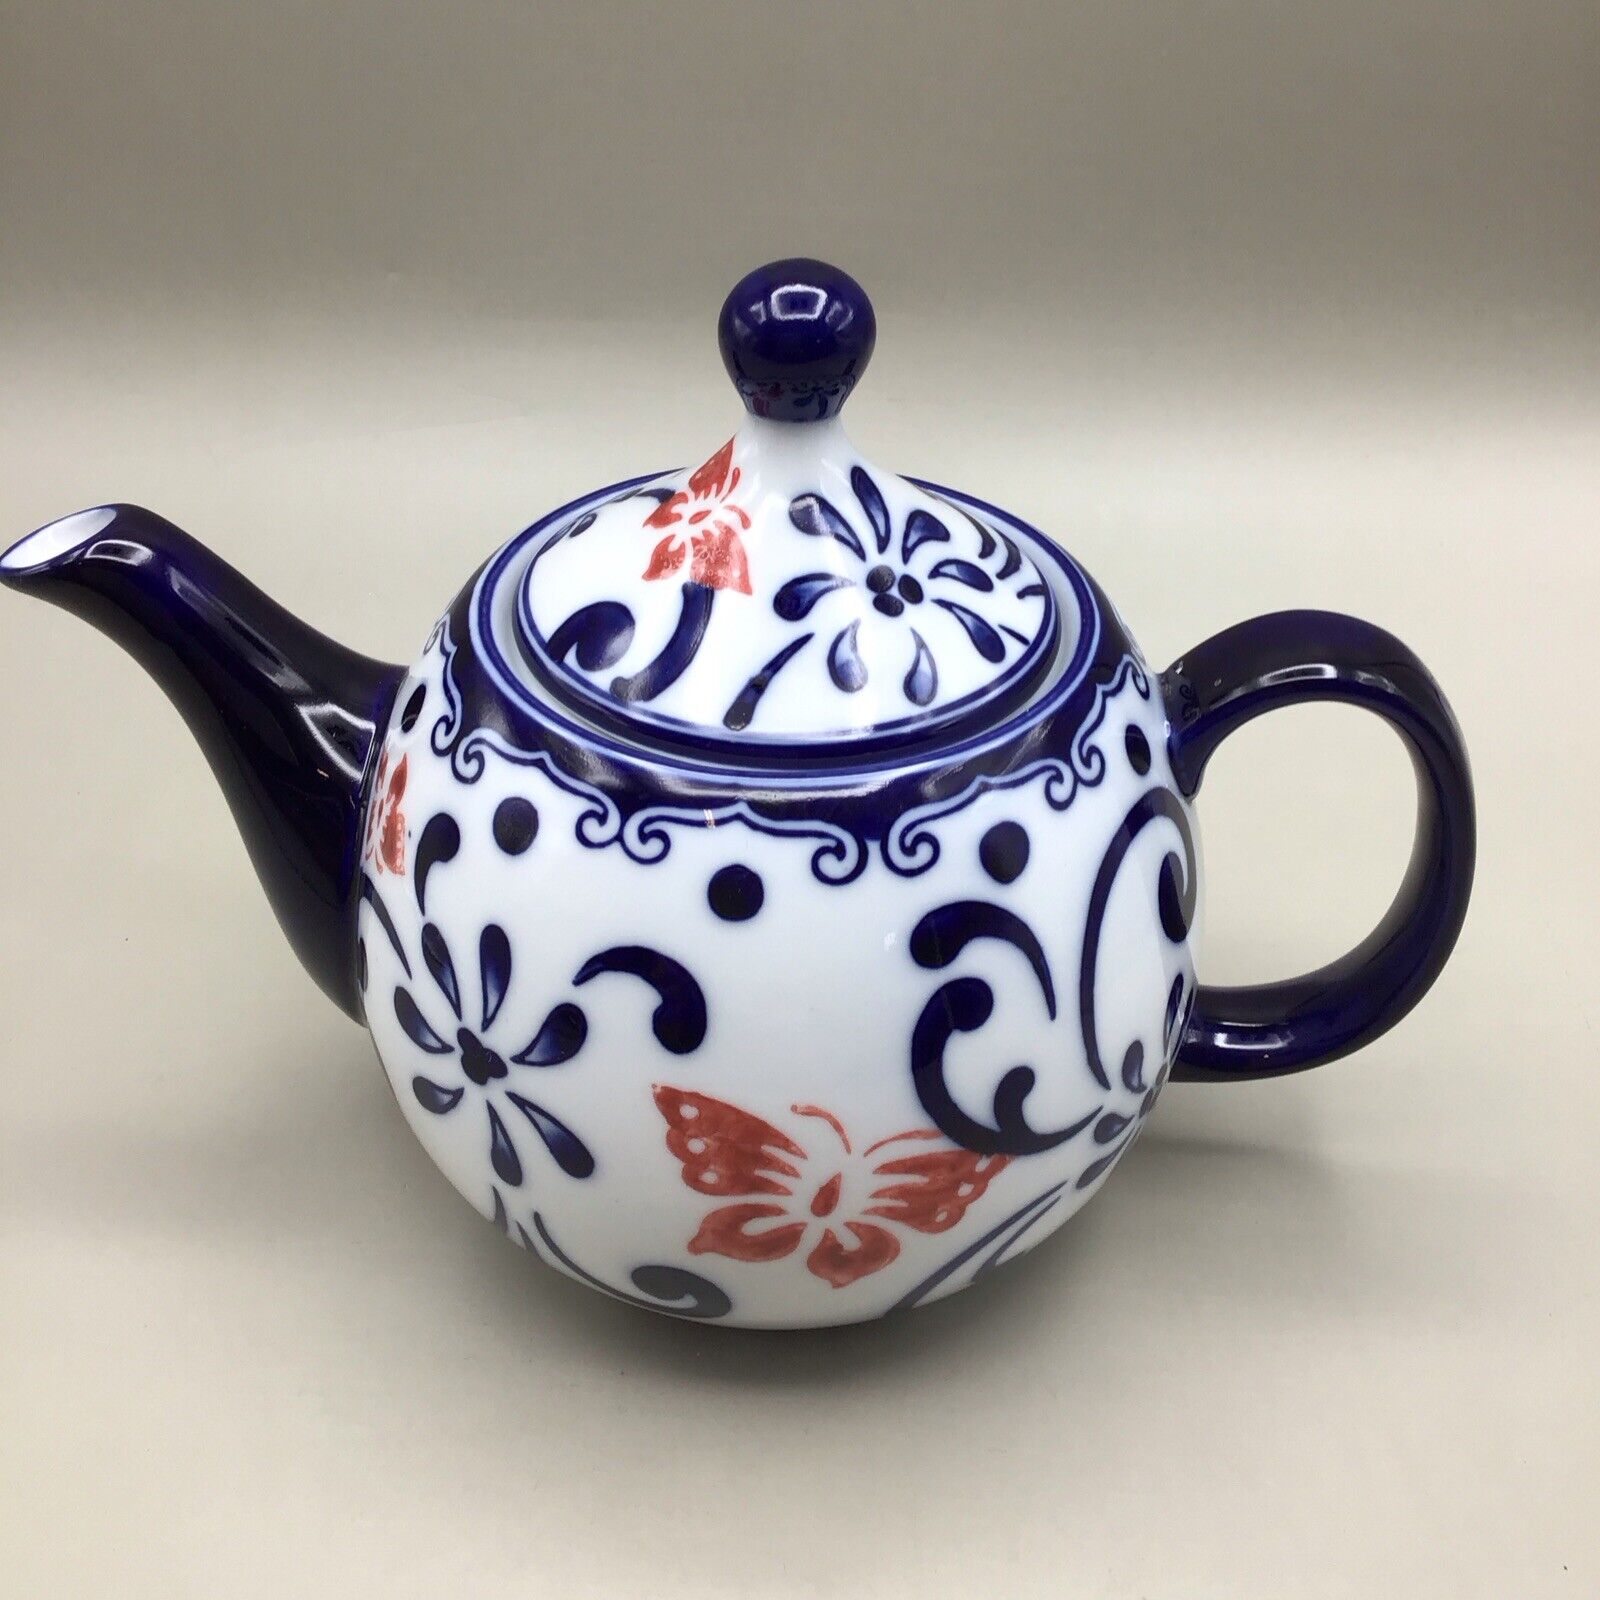 Pier 1 Imports Butterfly Blossom Teapot Blue-White / Red Butterfly Porcelain